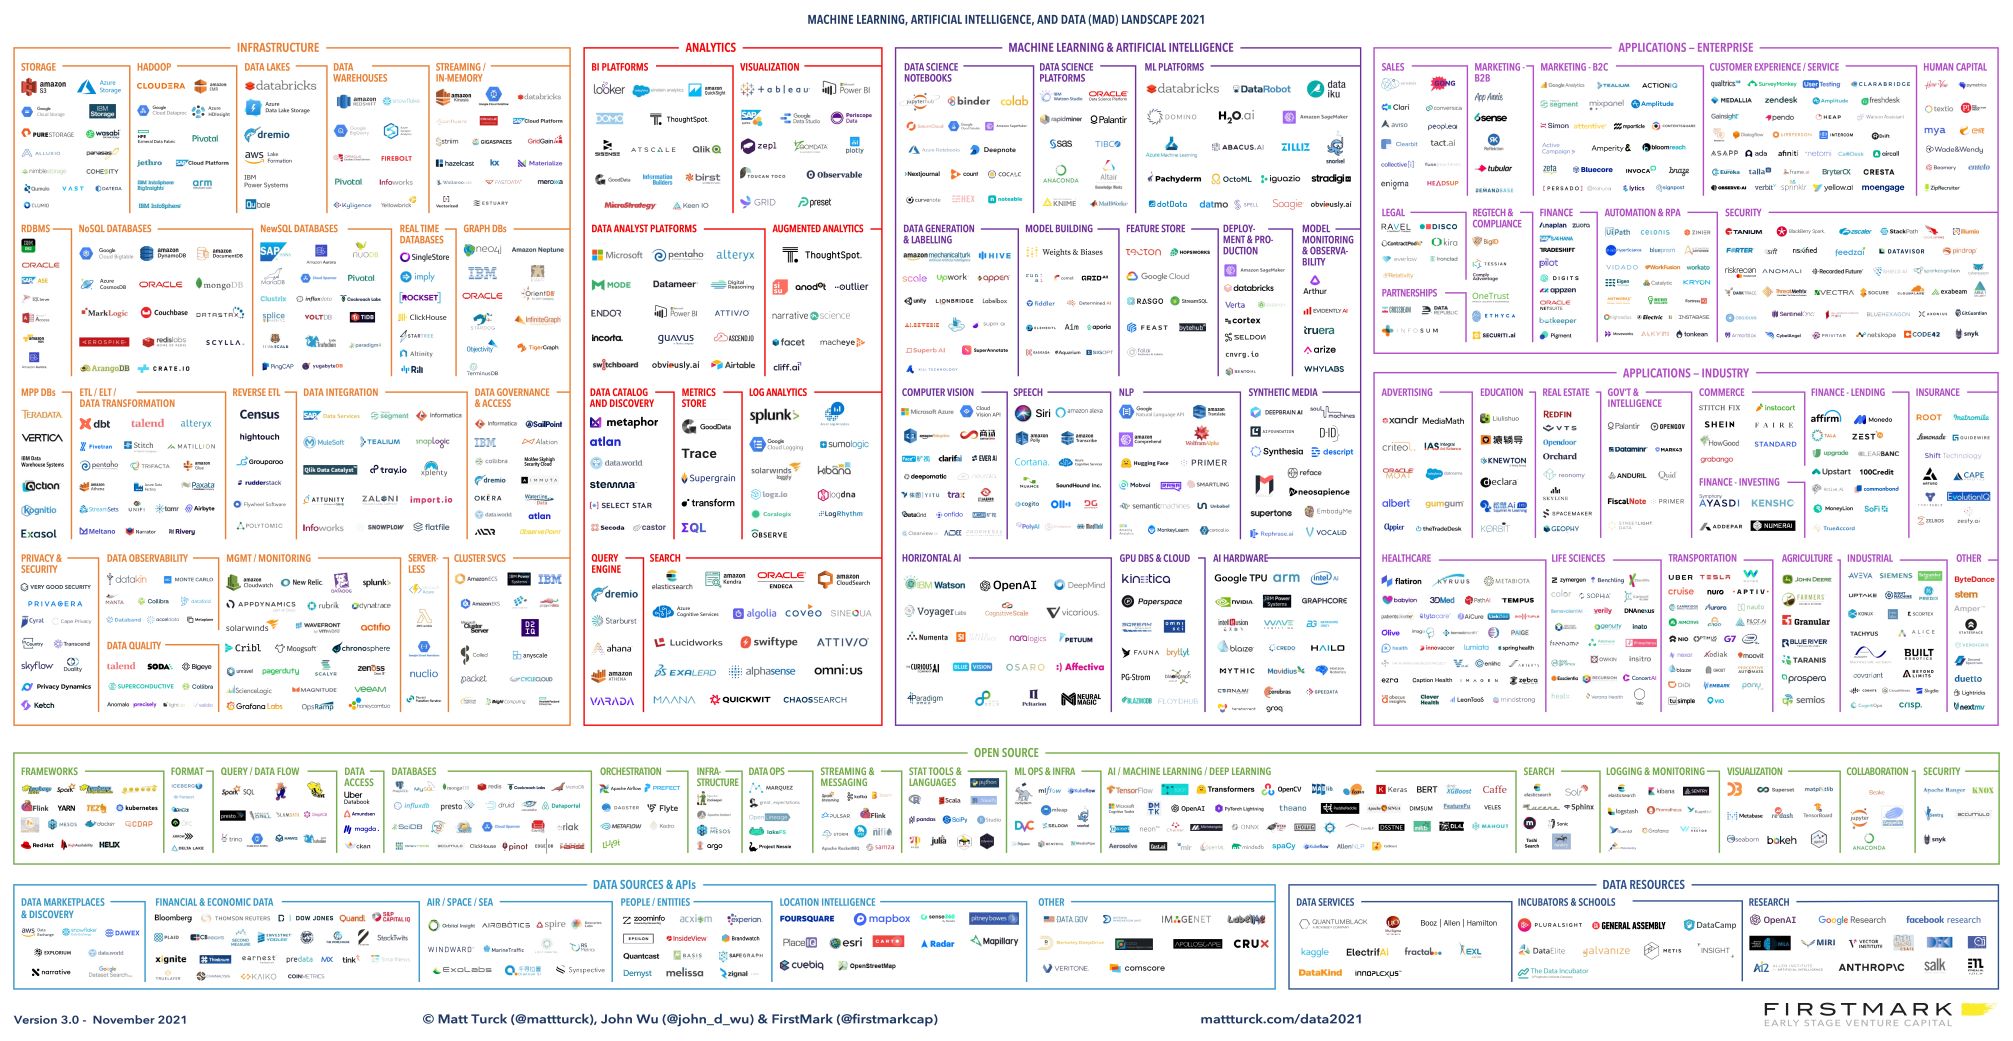 The 2021 Machine Learning, AI and Data (MAD) Landscape